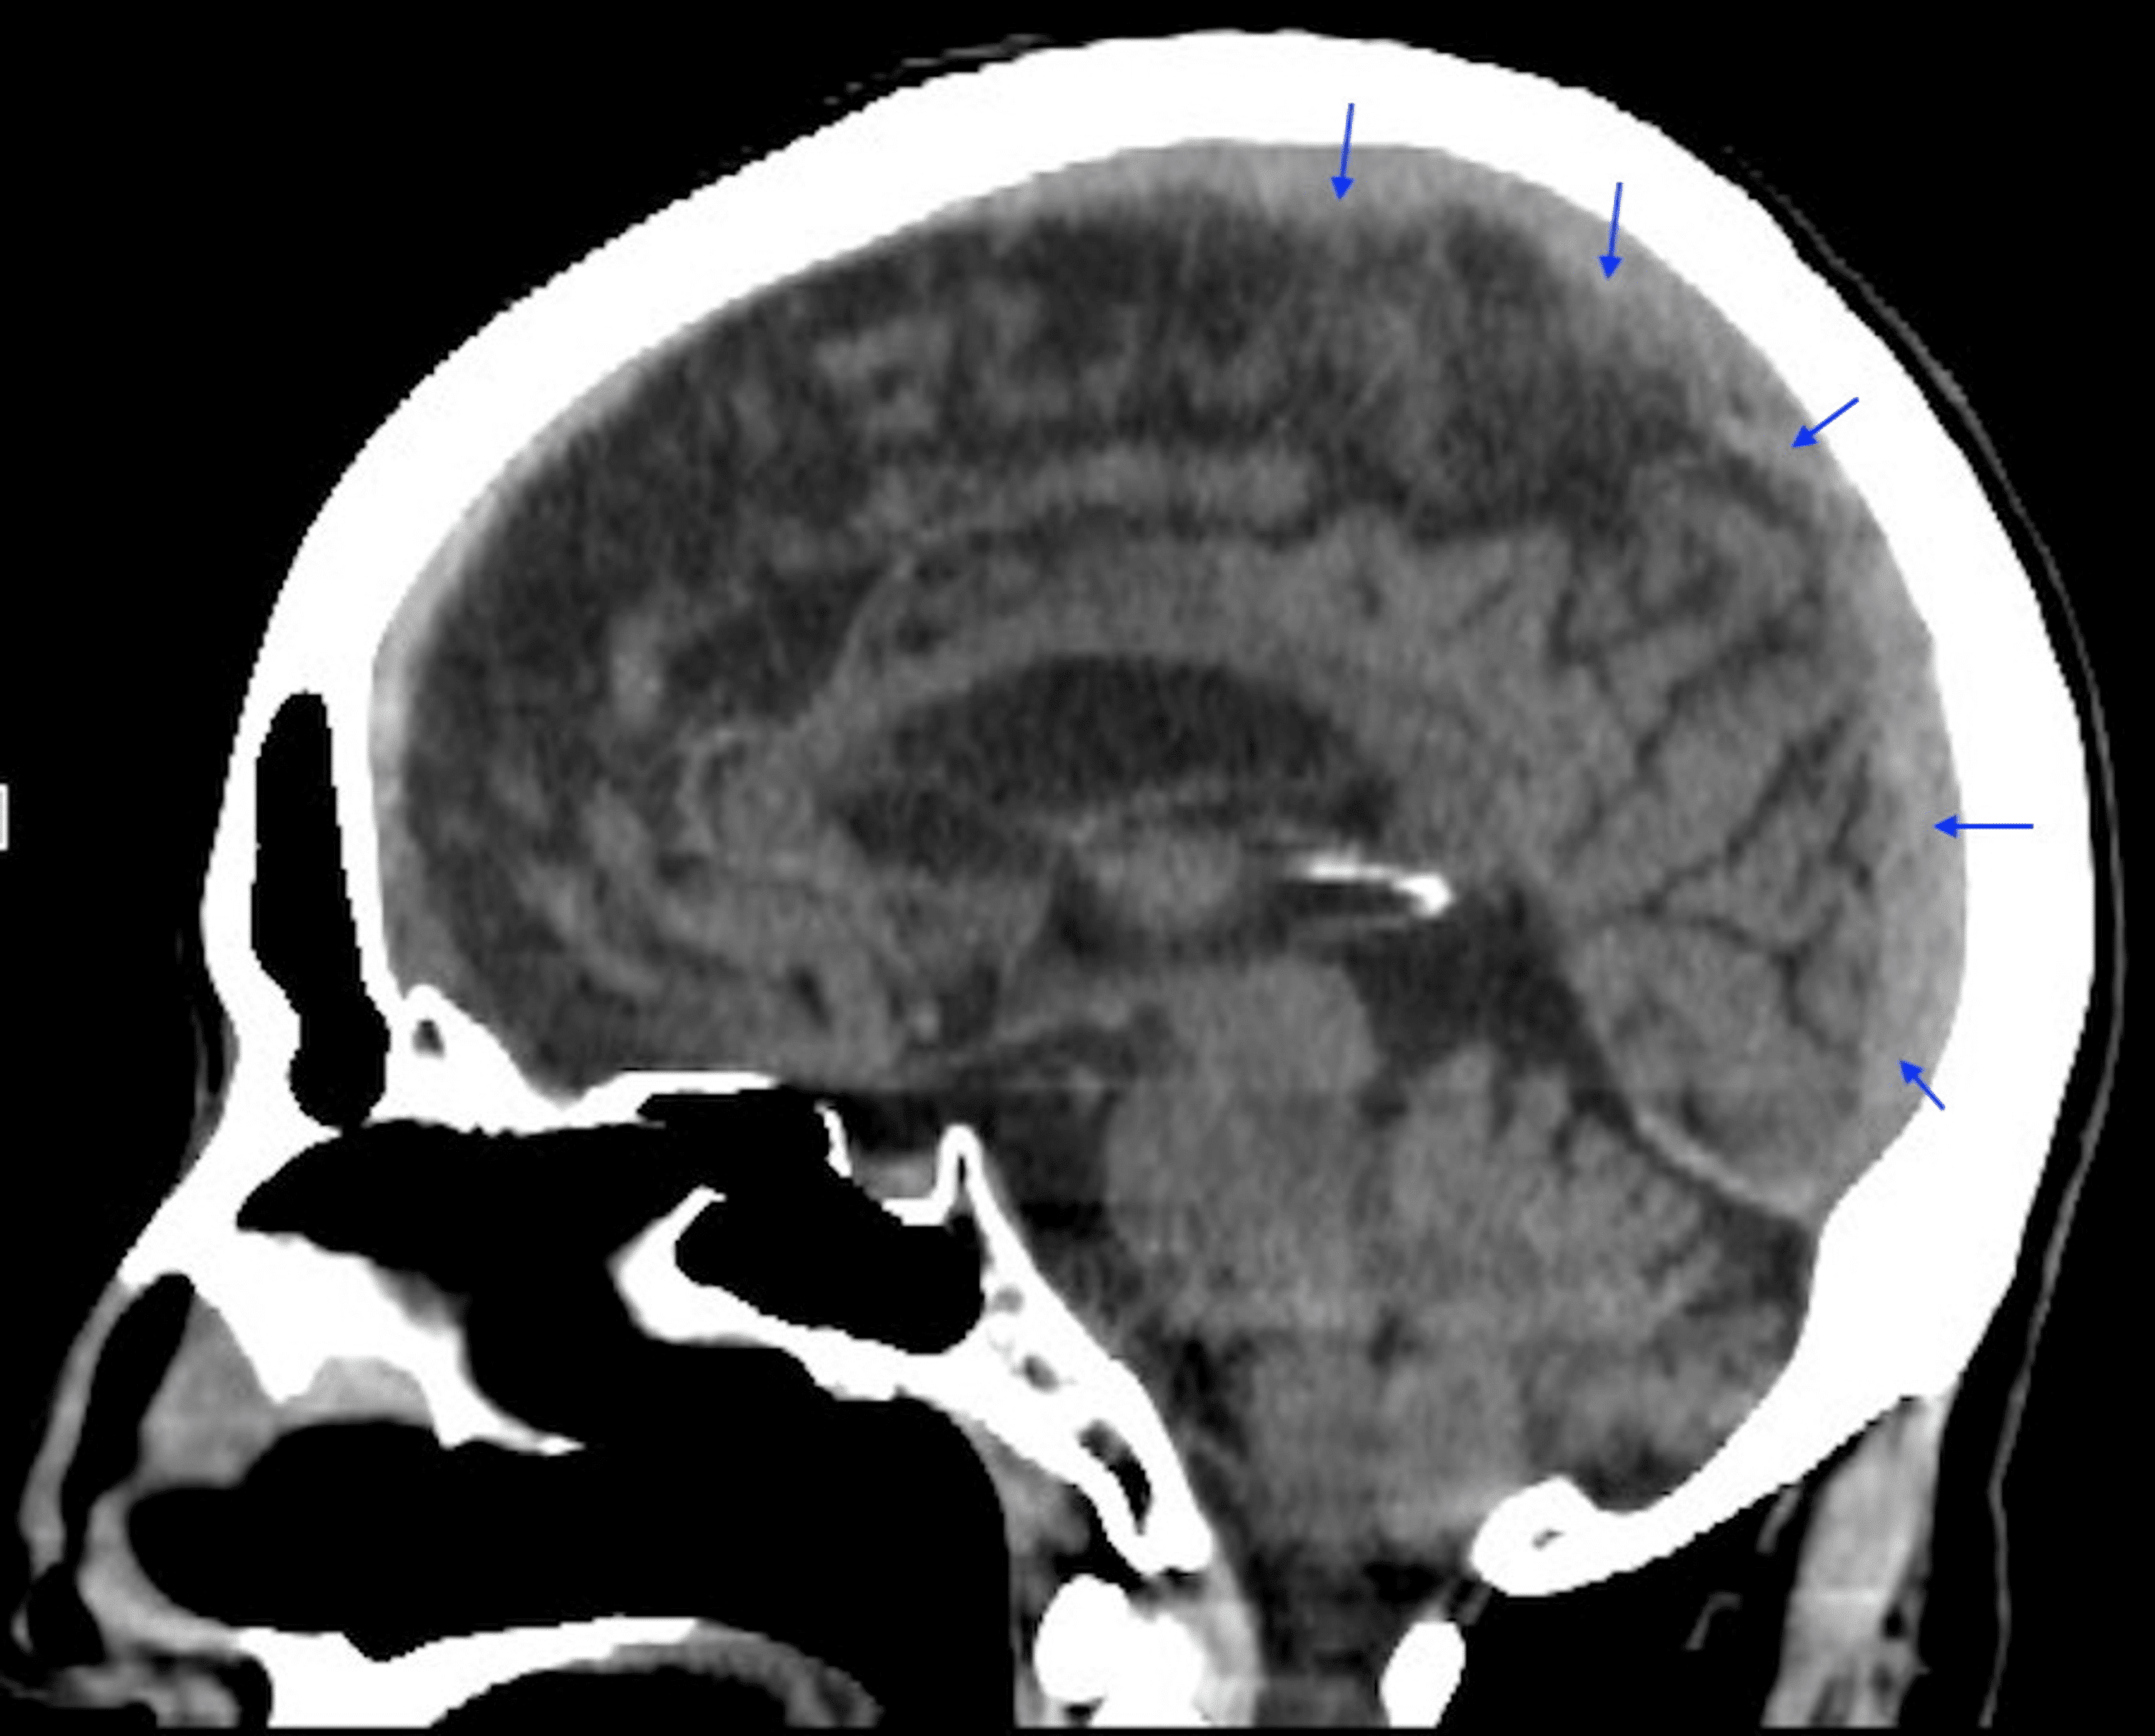 Acute-on-Chronic Subdural Hematoma Secondary to Falls Due to Alcoholism